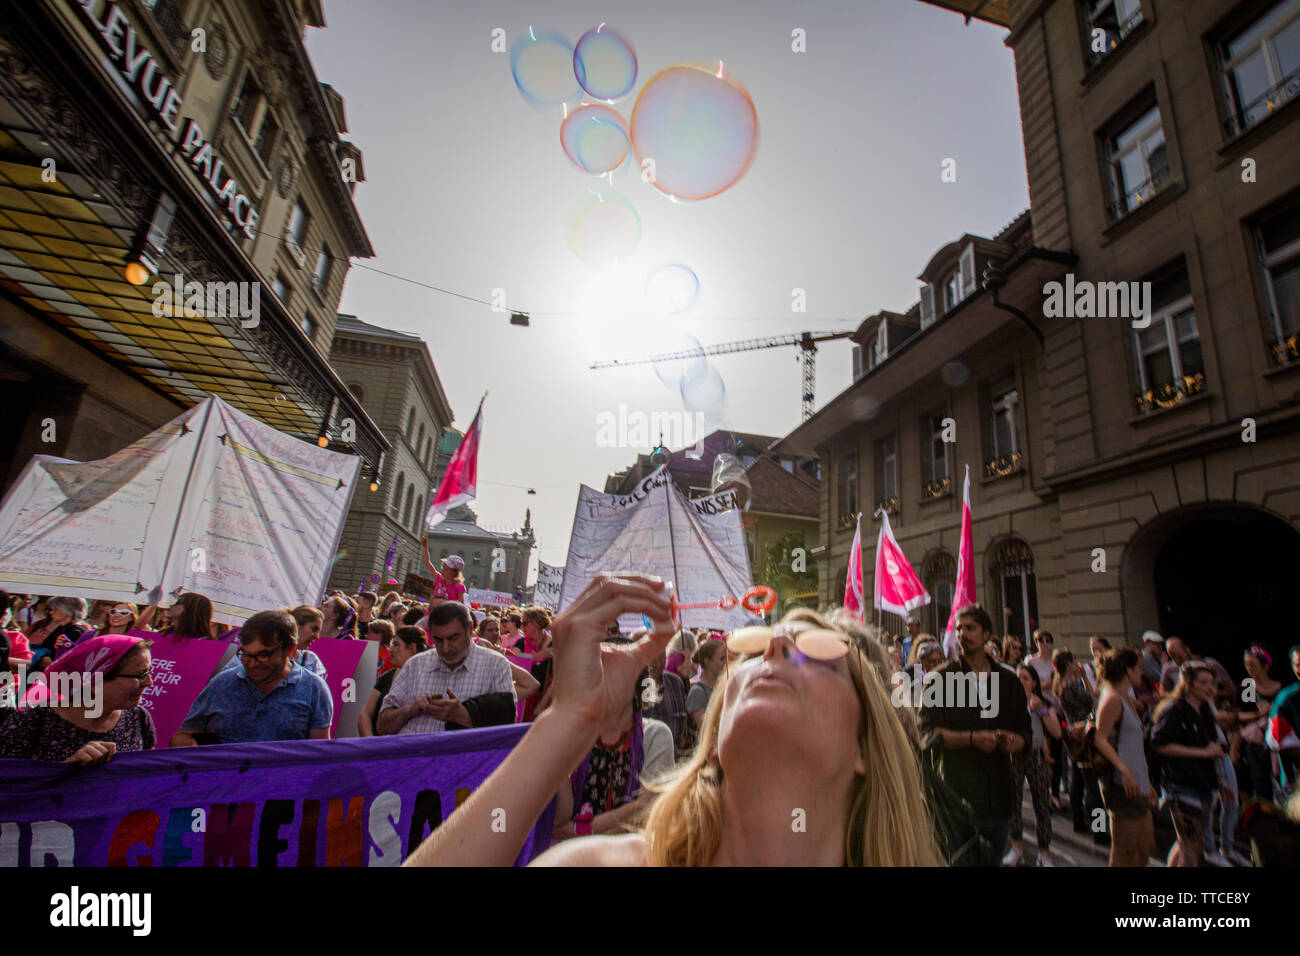 Annina Michel from Bern blows soap bubbles in the Frauenstreik March in Bern. The Frauenstreik - Womens Strike - brought record numbers of women to the streets in all the big cities in Switzerland. In the capitol Bern, more than 40.000 marched throughout the city to fight for gender equality. Stock Photo